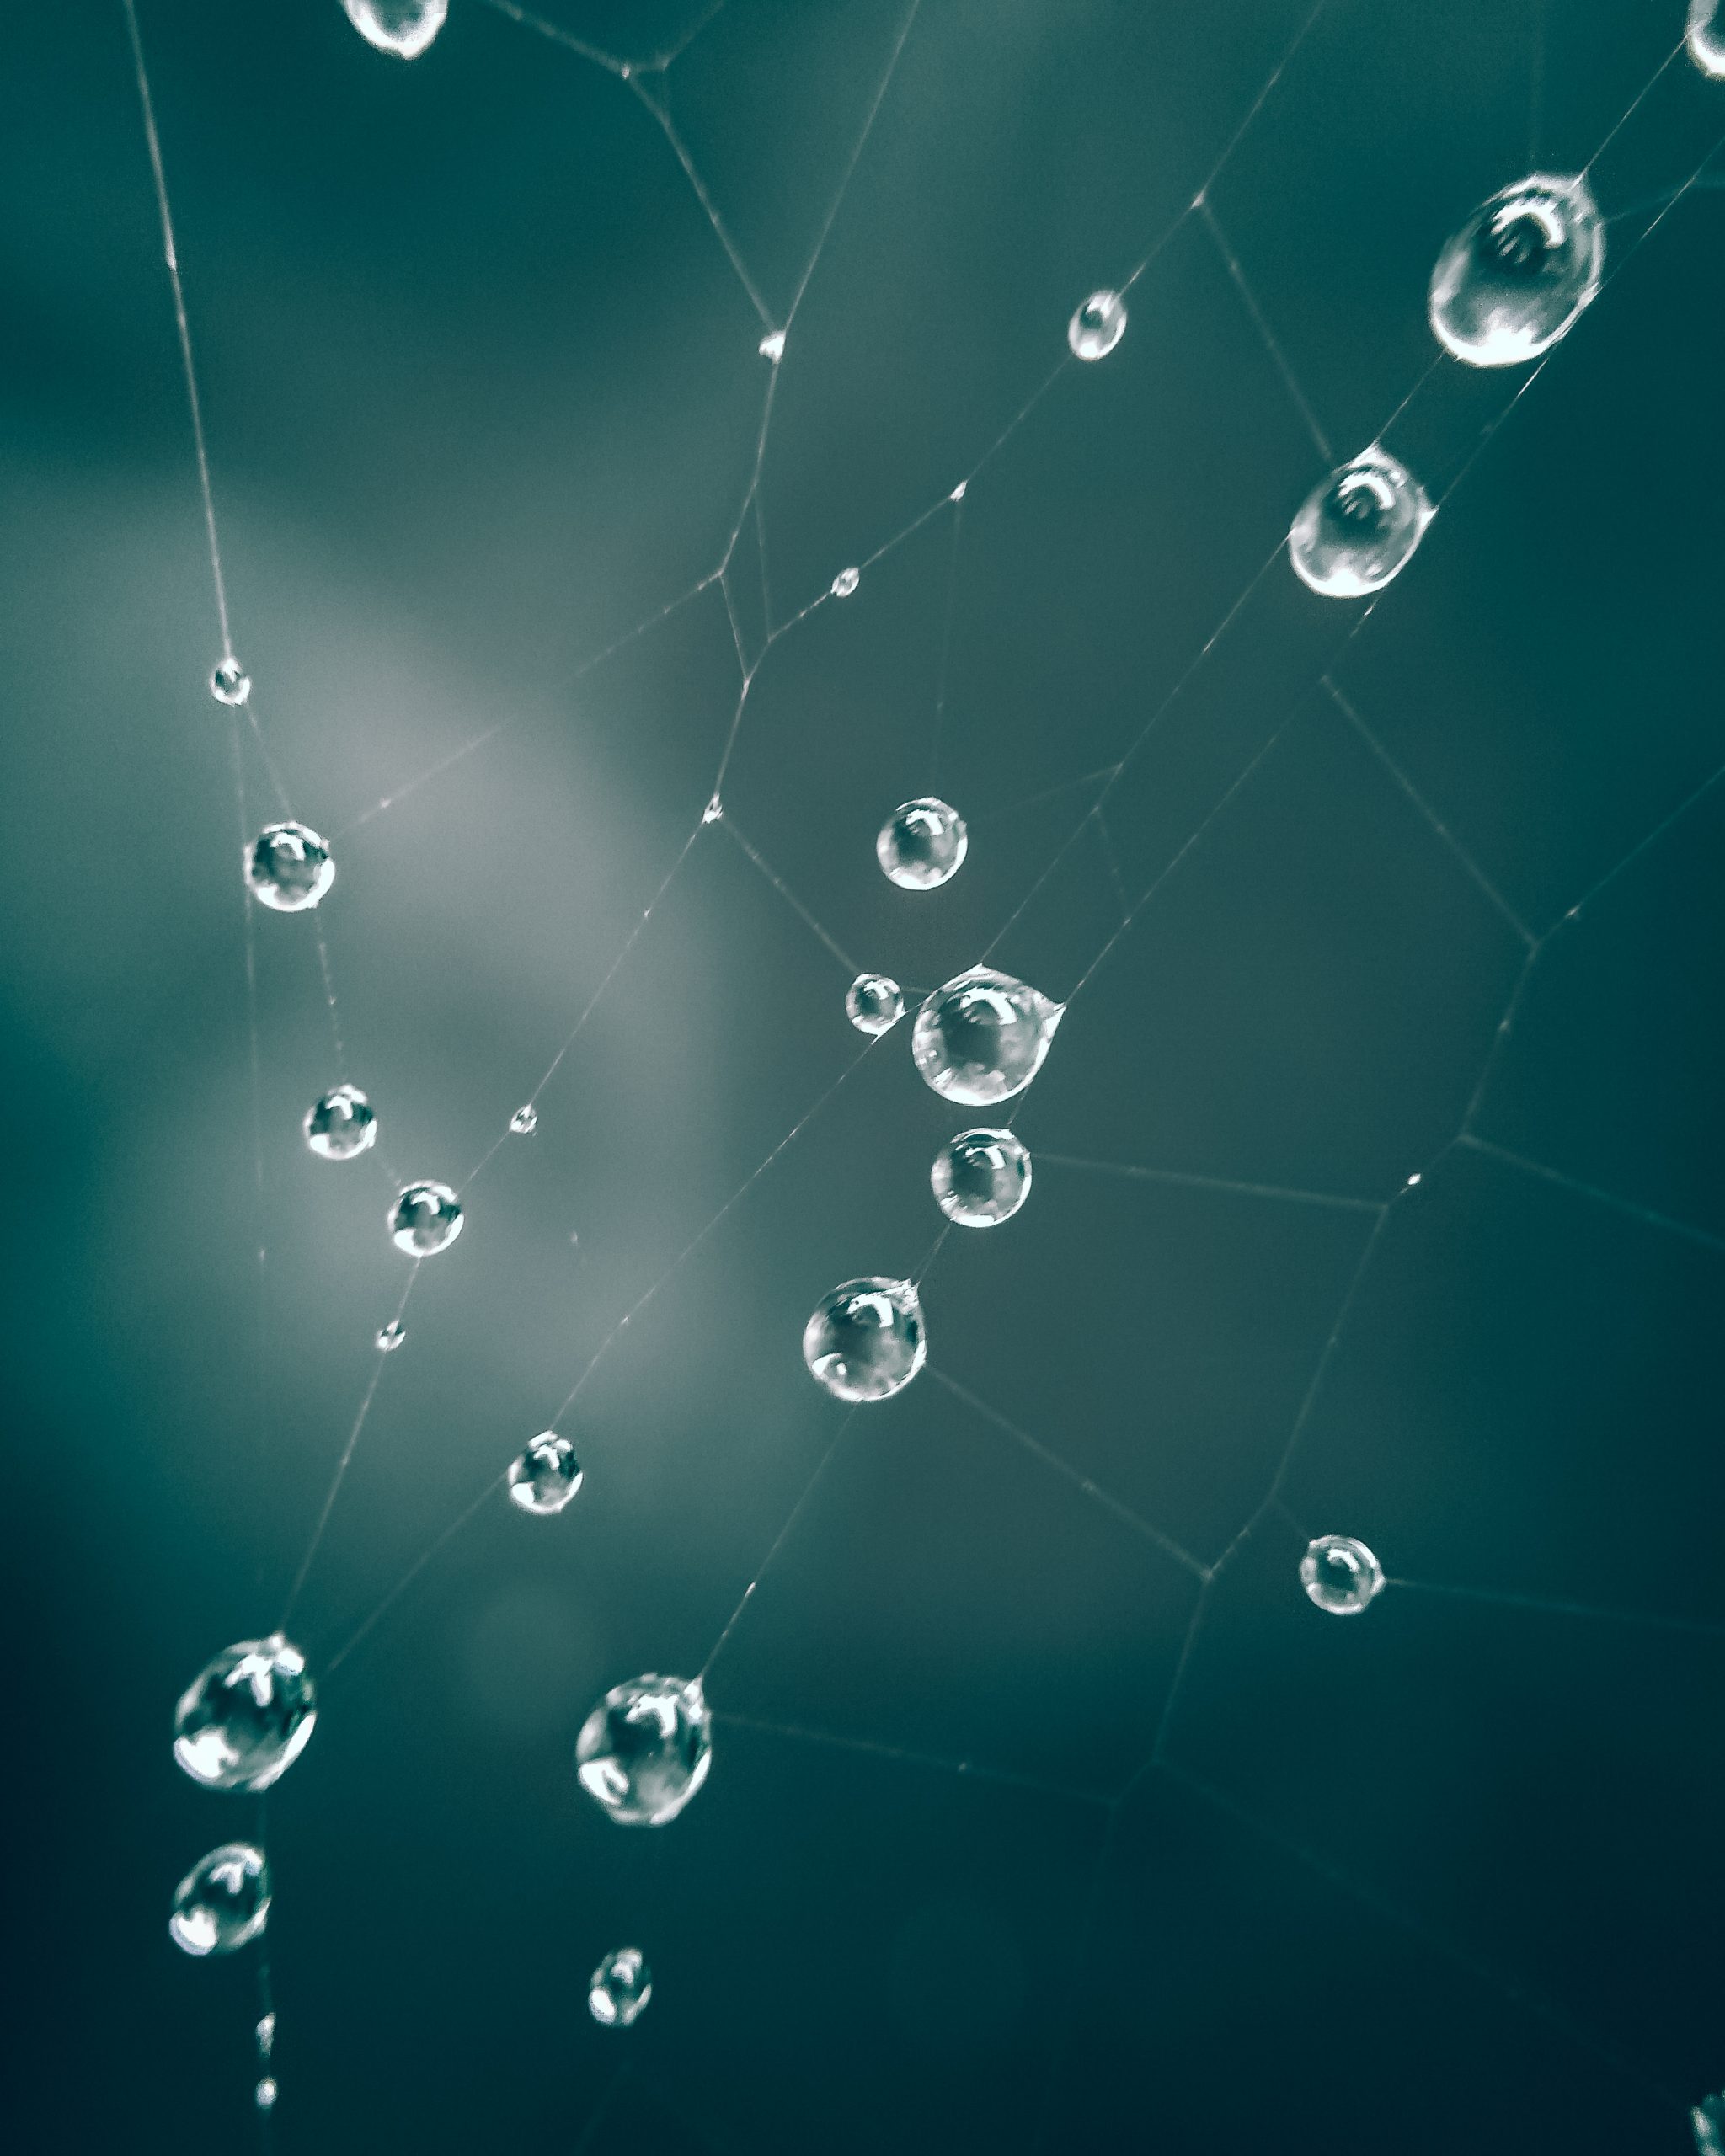 Water Droplets in Spider Net